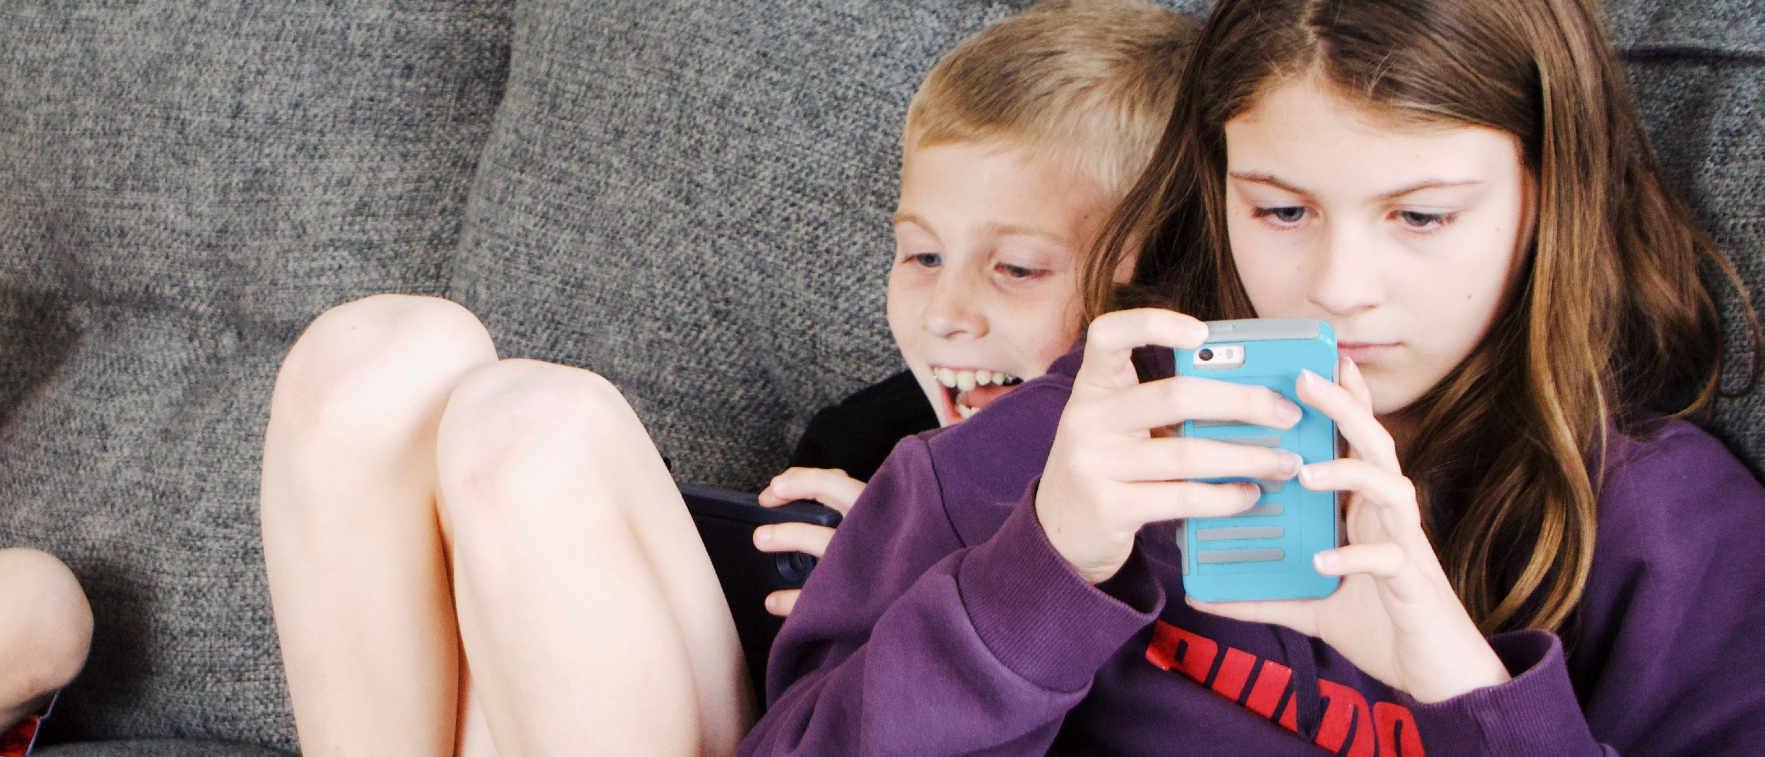 How can states realise children’s rights in a digital world? Invitation to a consultation